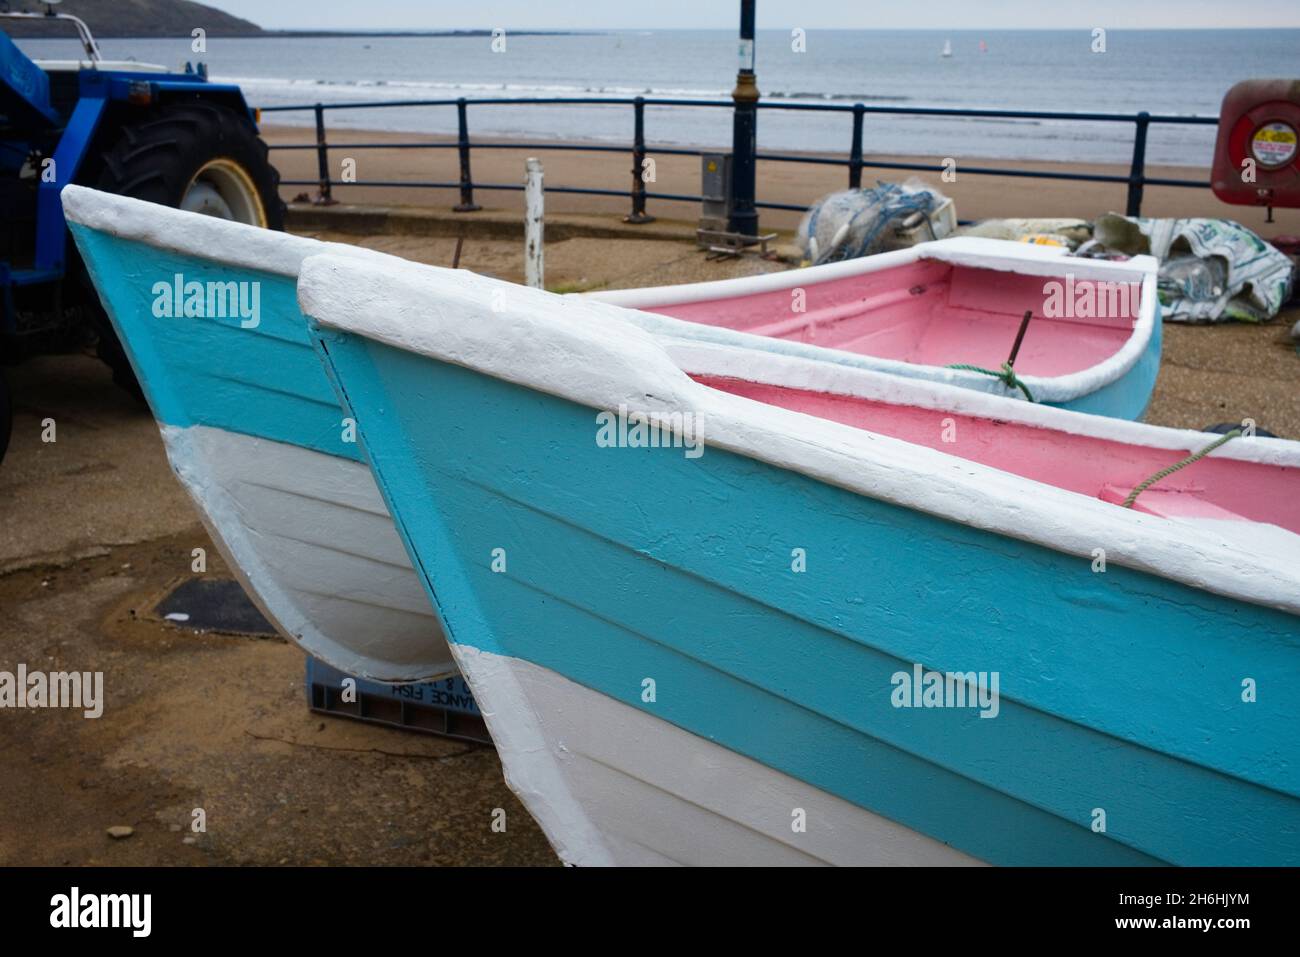 Pink and blue boats on the beachside at Filey in North Yorkshire Stock Photo